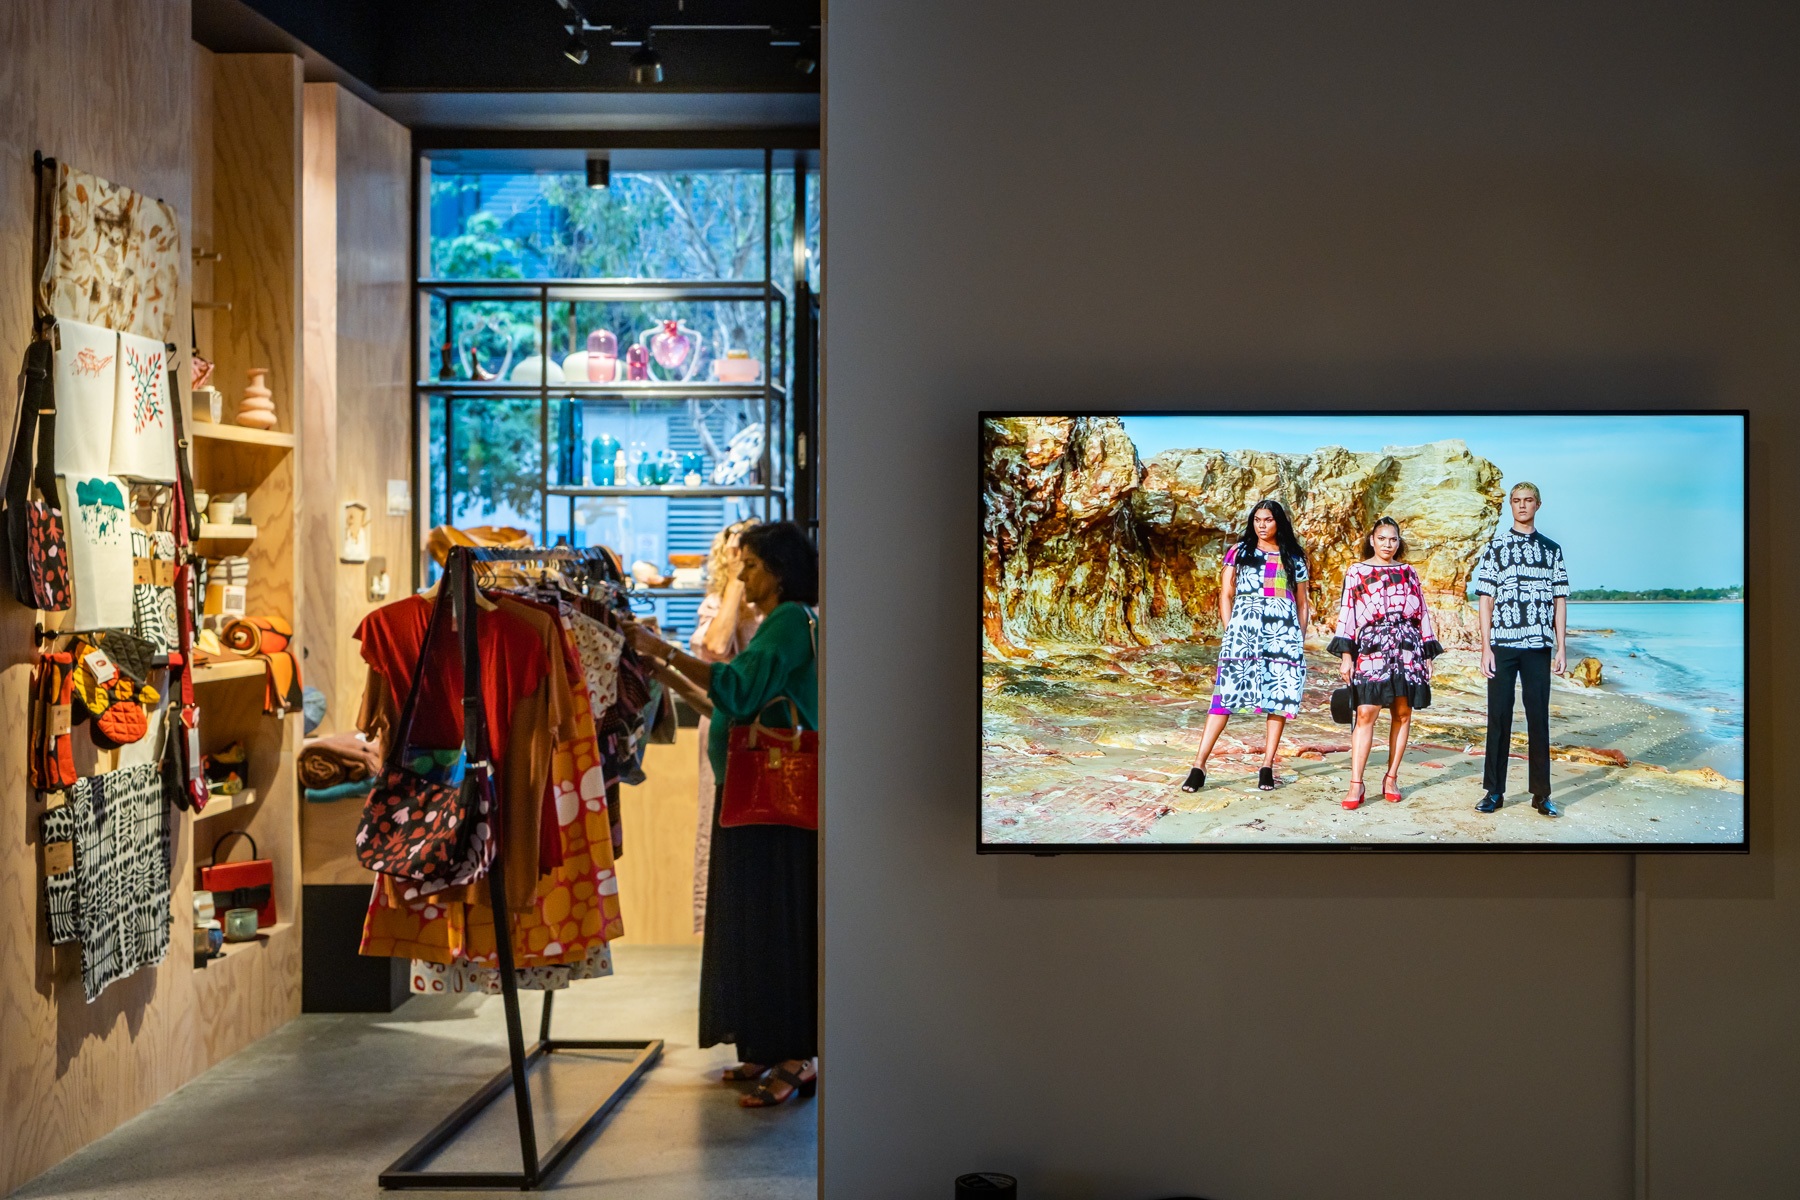 A photograph captures a woman browsing clothes in a gallery store filledl to the right a video shows three figures modelling contemporary Indigenous clothing at a striking seaside location